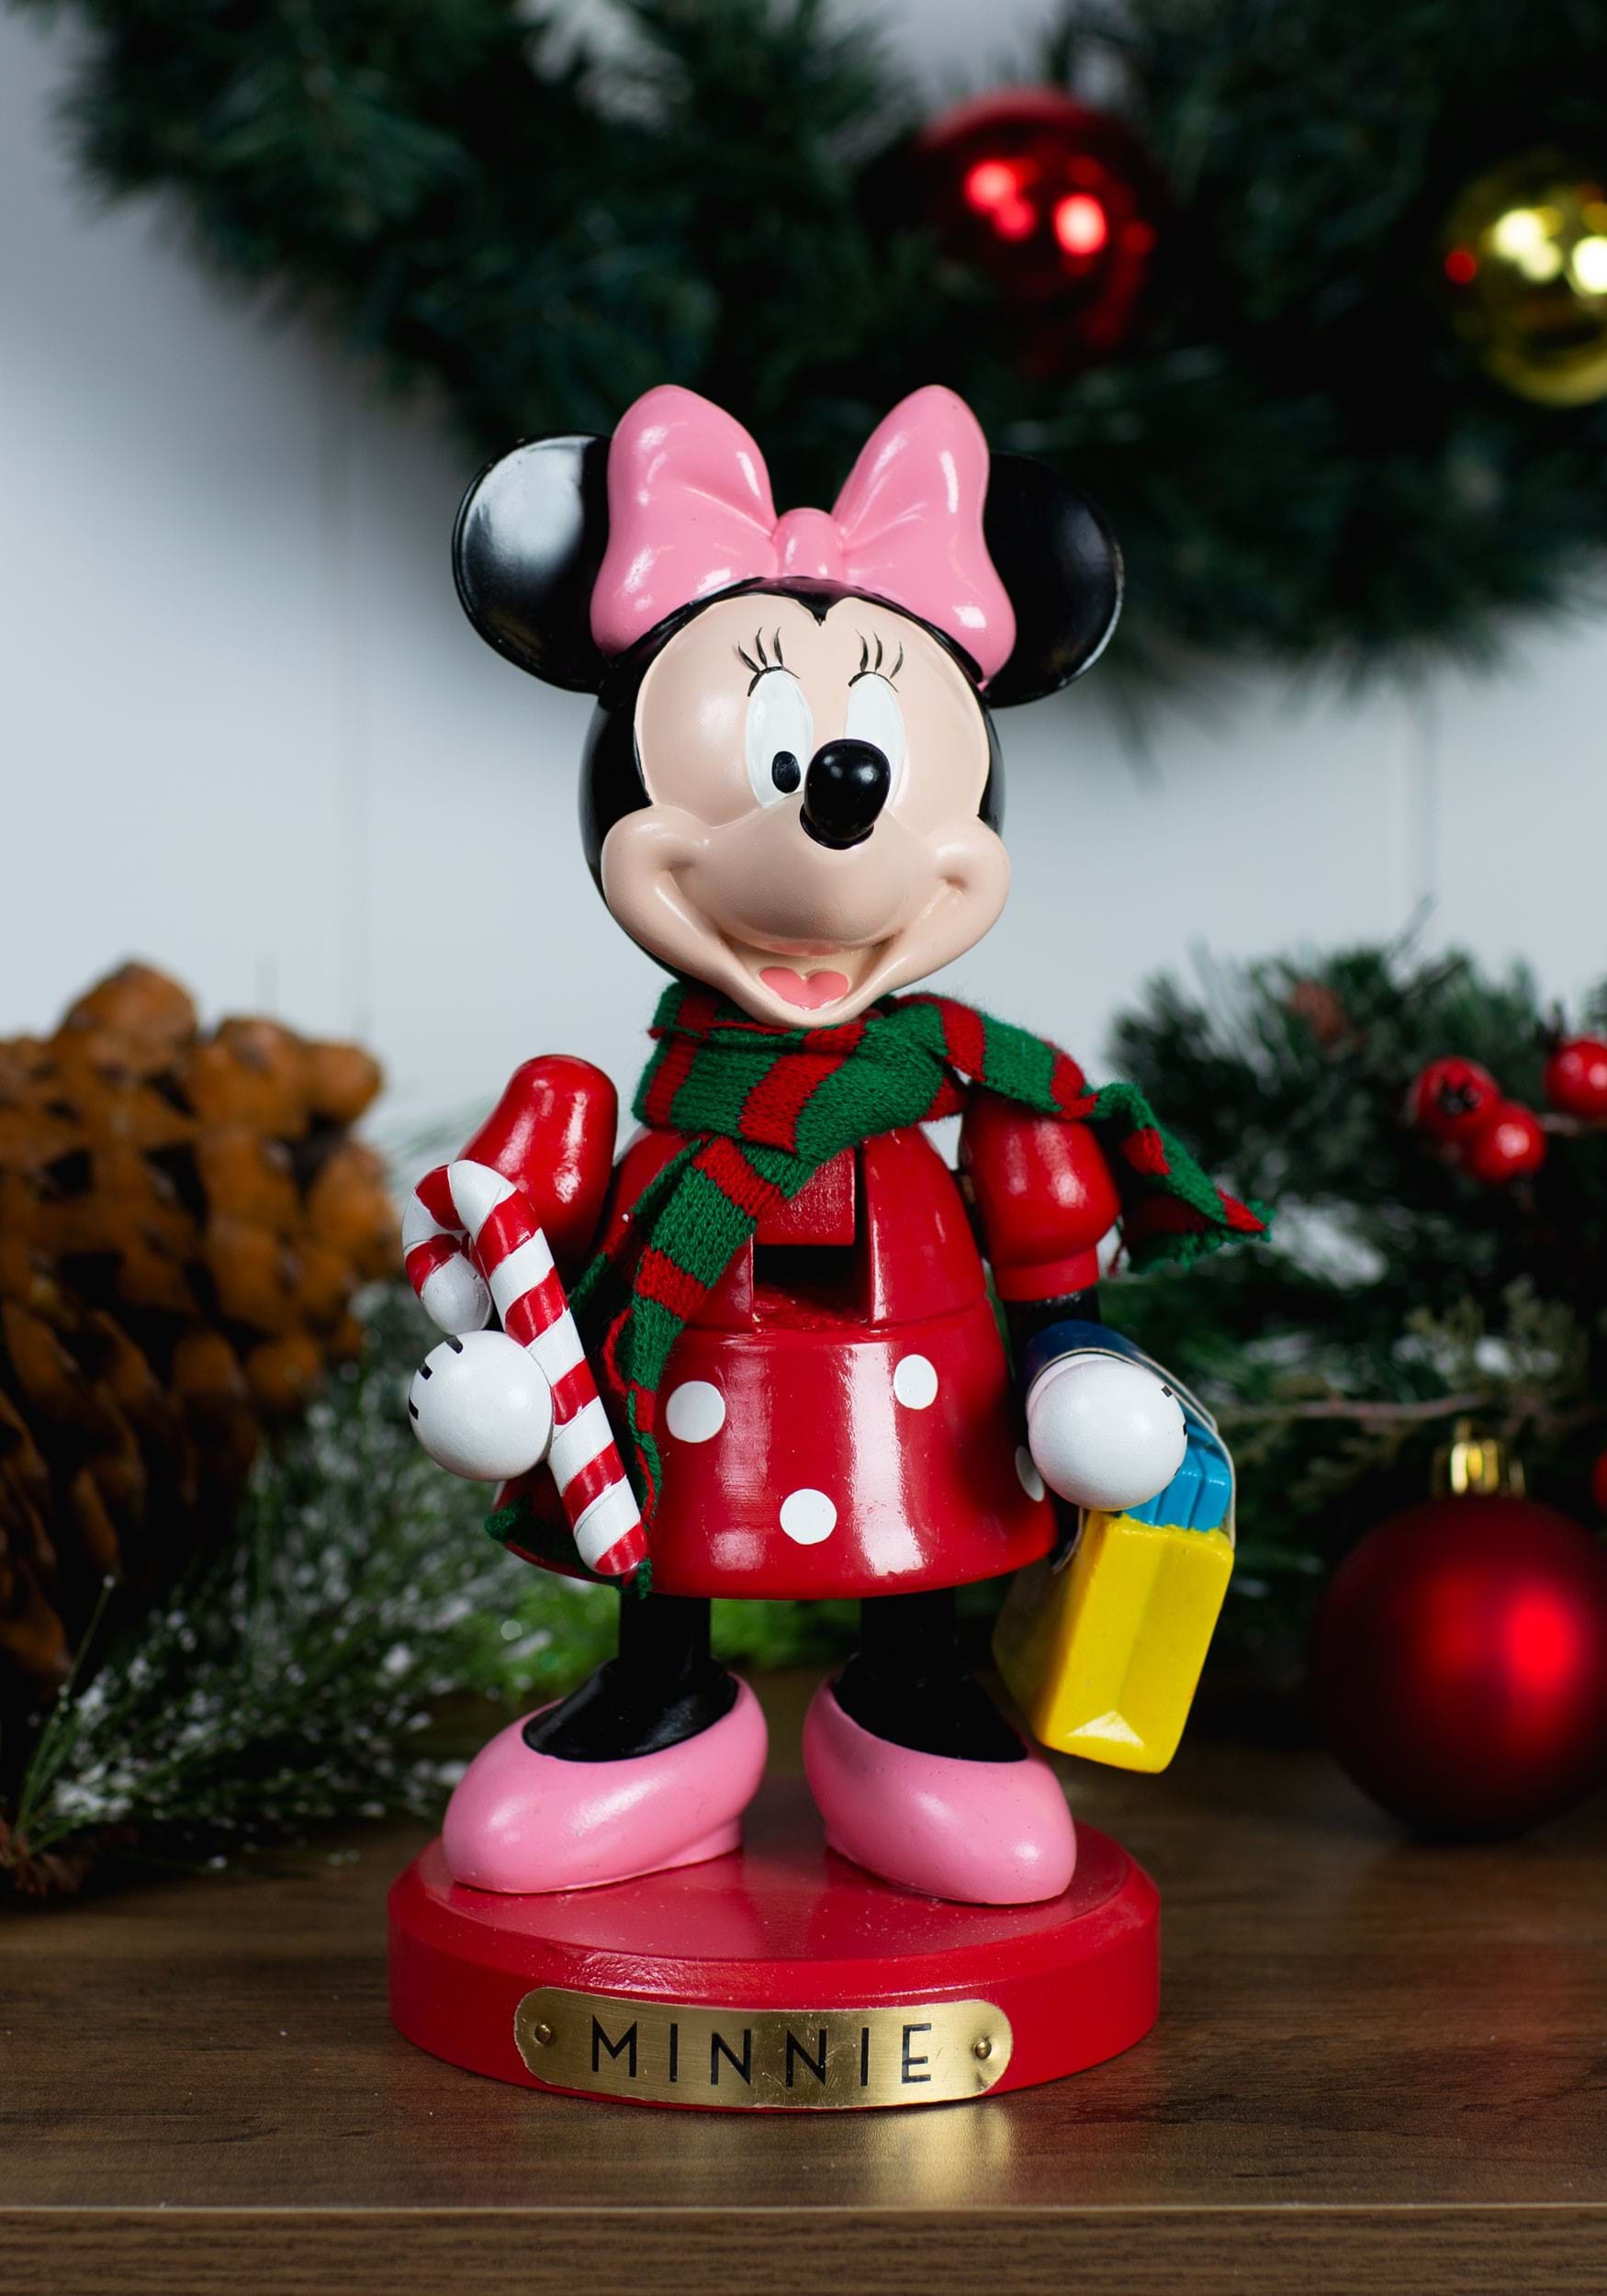 10 Inch Minnie Mouse with Candy Cane Nutcracker | Disney Christmas Decorations